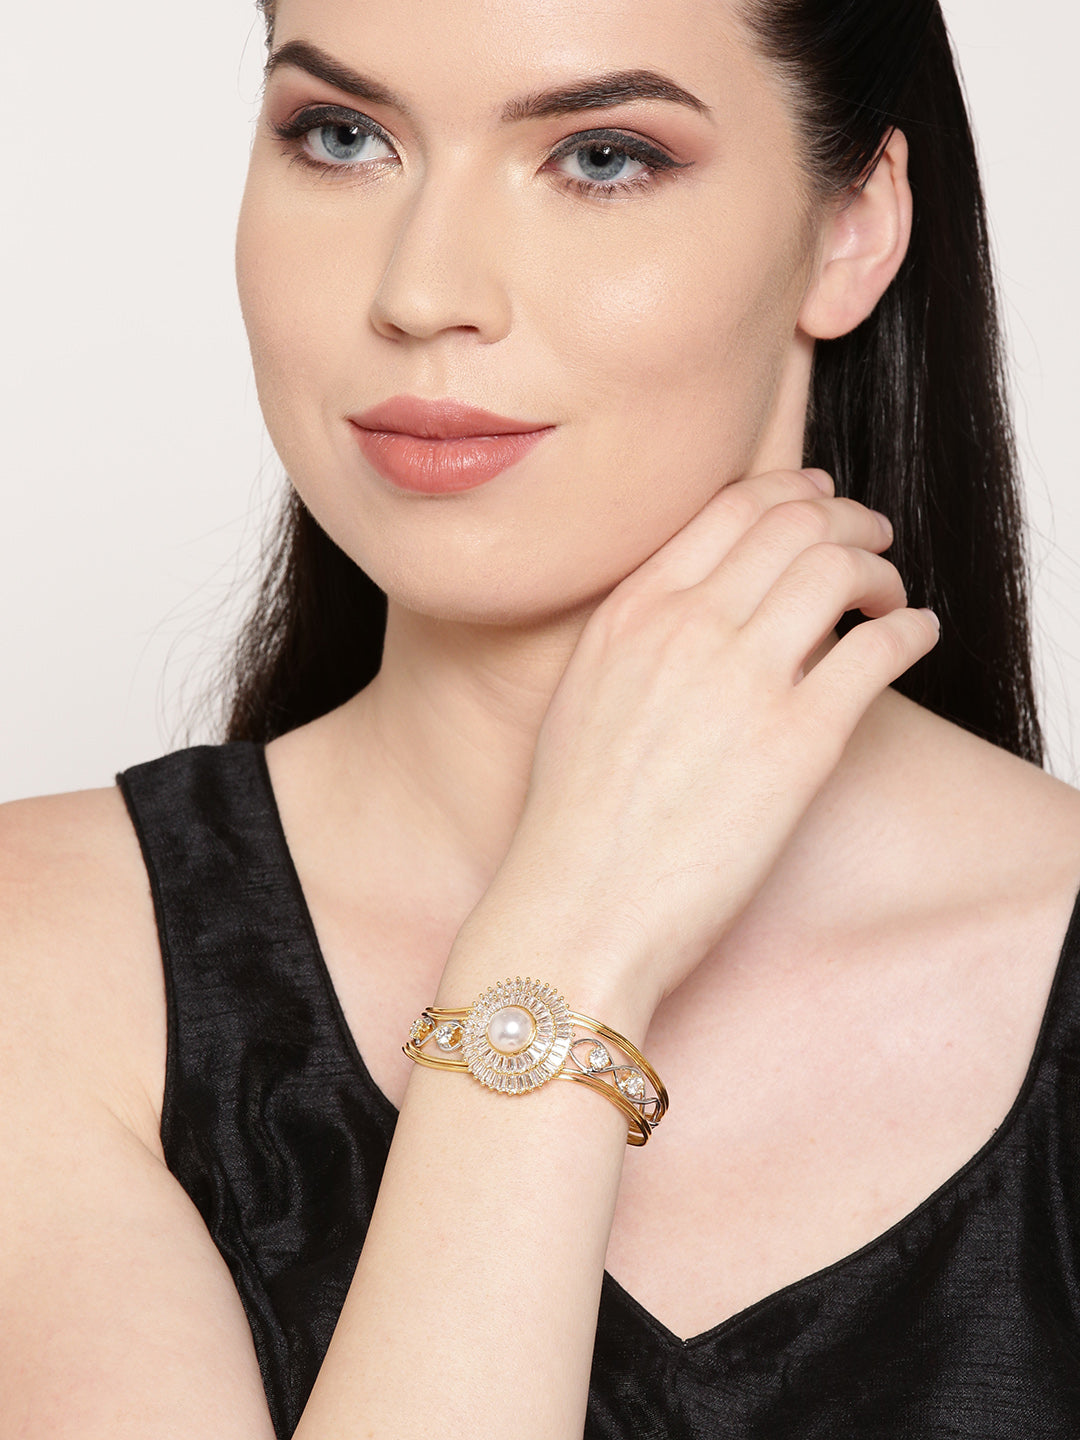 Gold-Plated American Diamond and Pearls Studded Cuff Bracelet in Floral Pattern